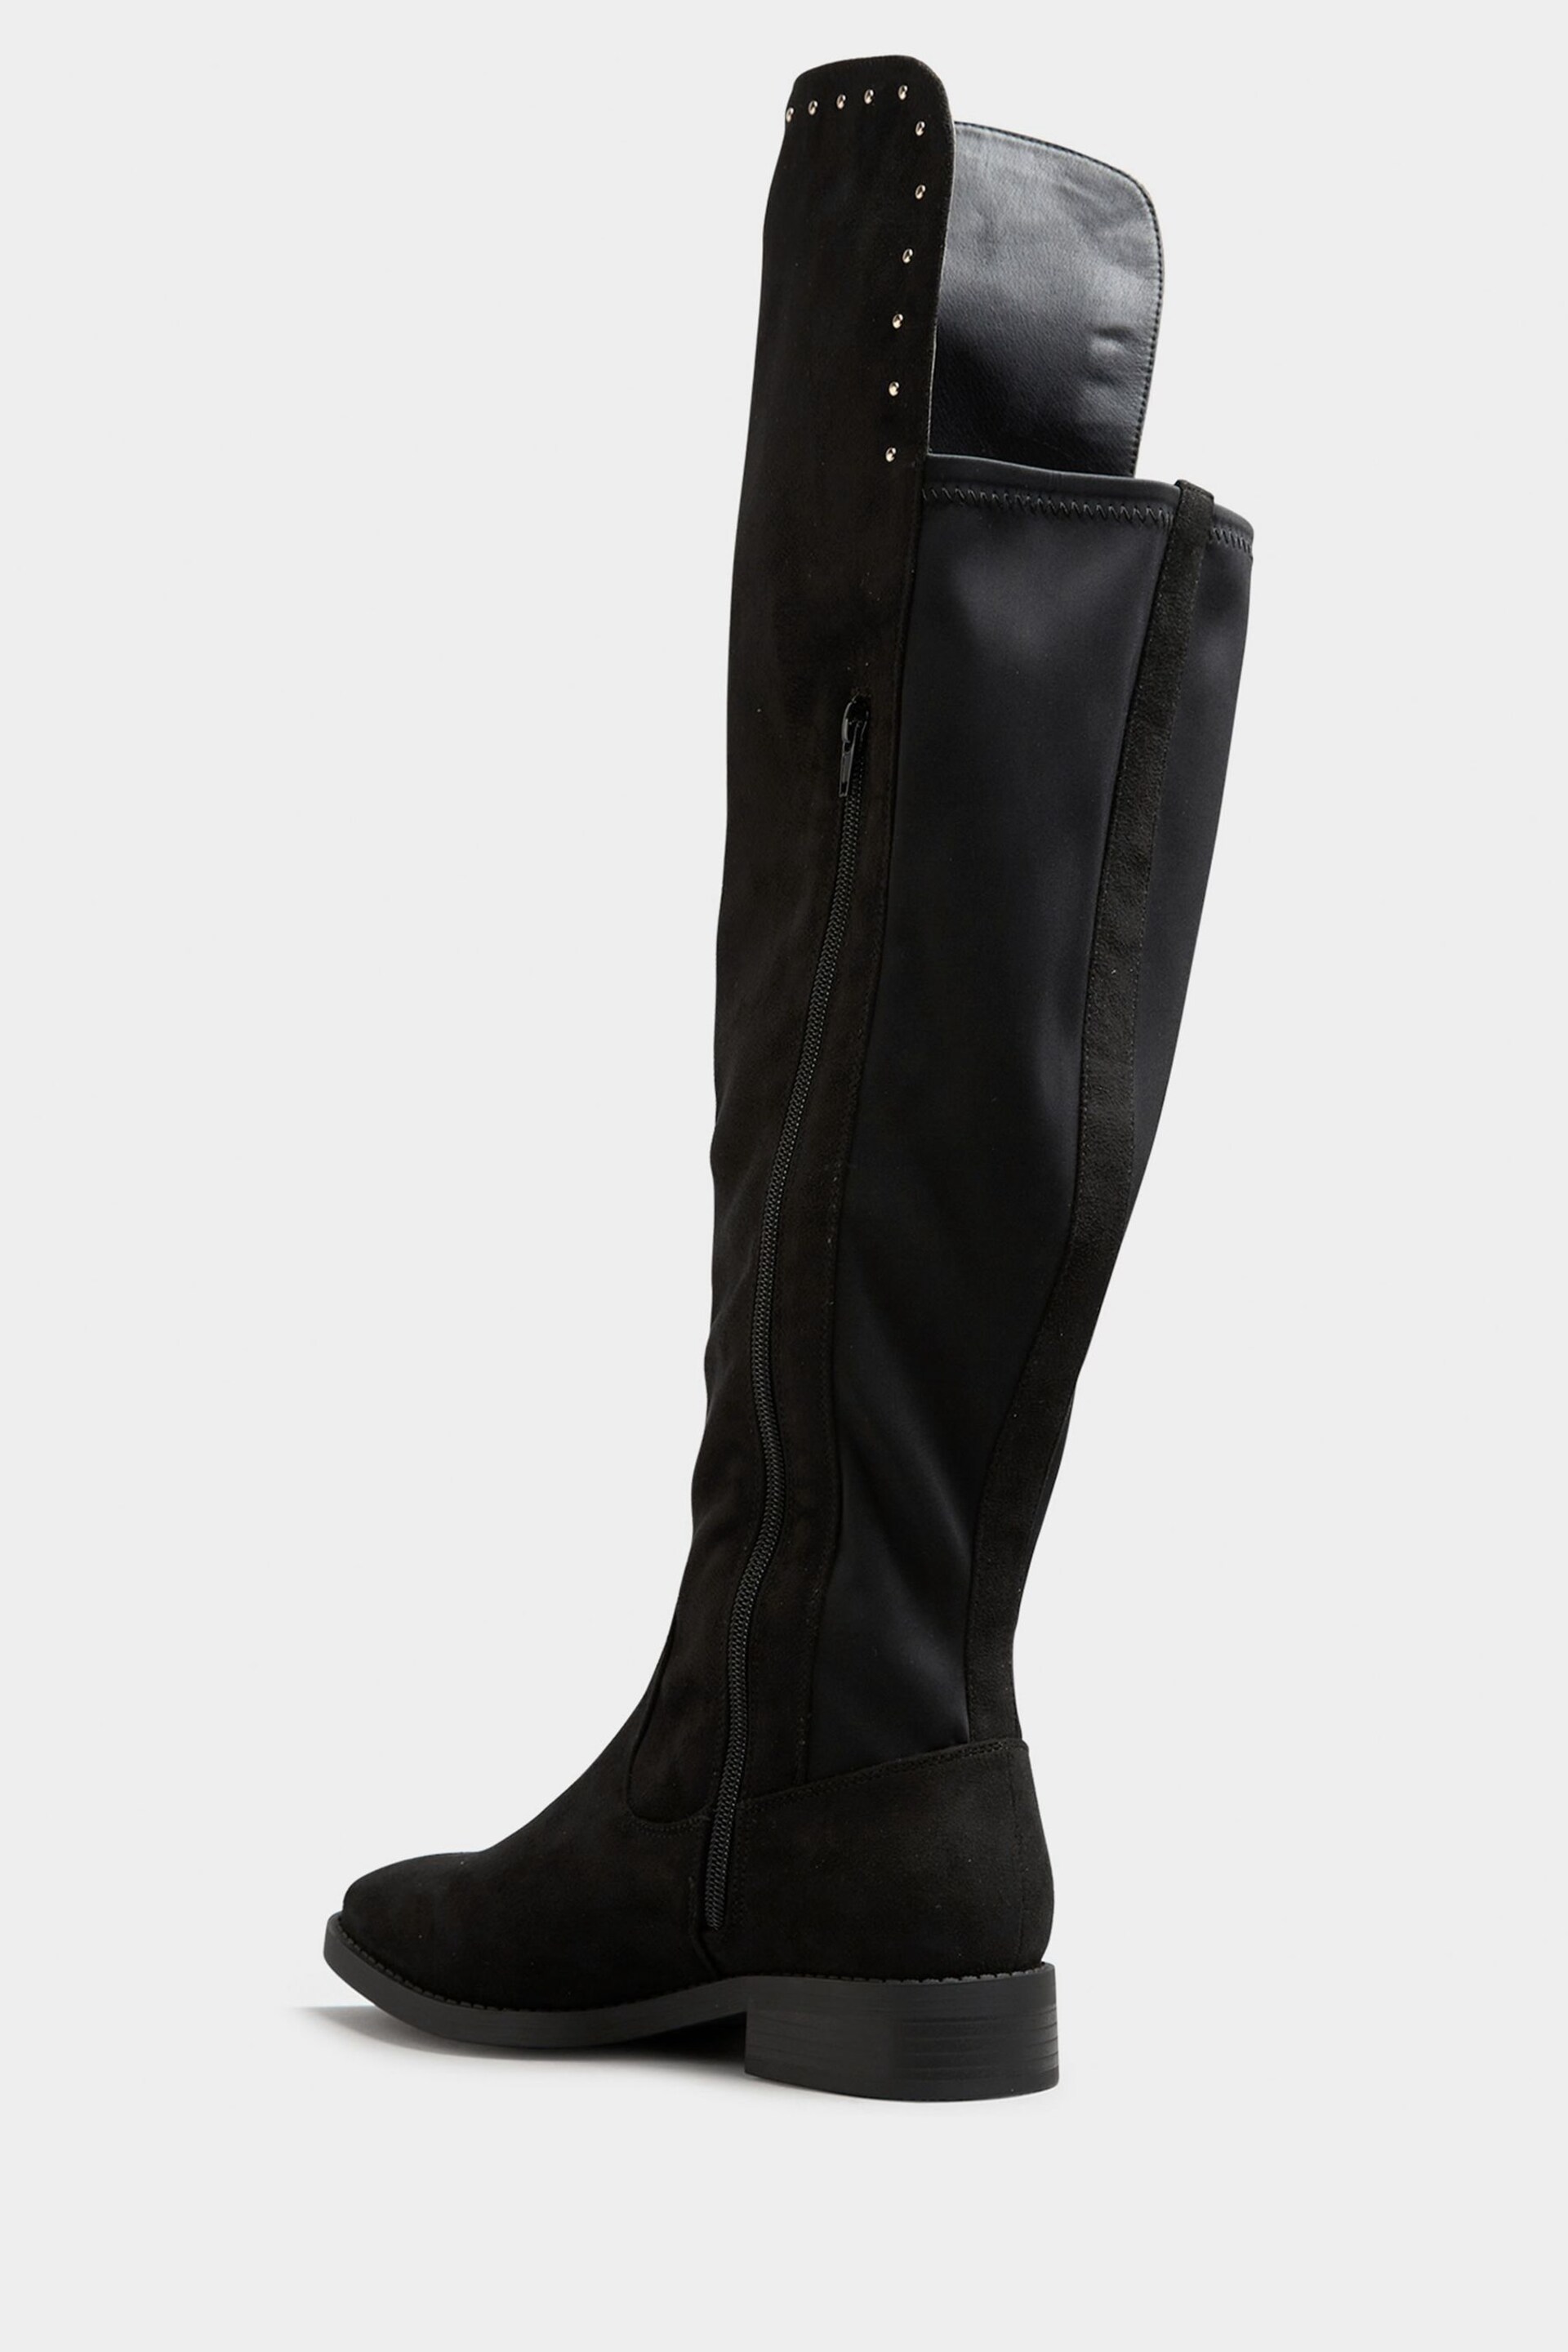 Yours Curve Black Extra Wide Over The Knee Boots With Stud Detail - Image 4 of 5